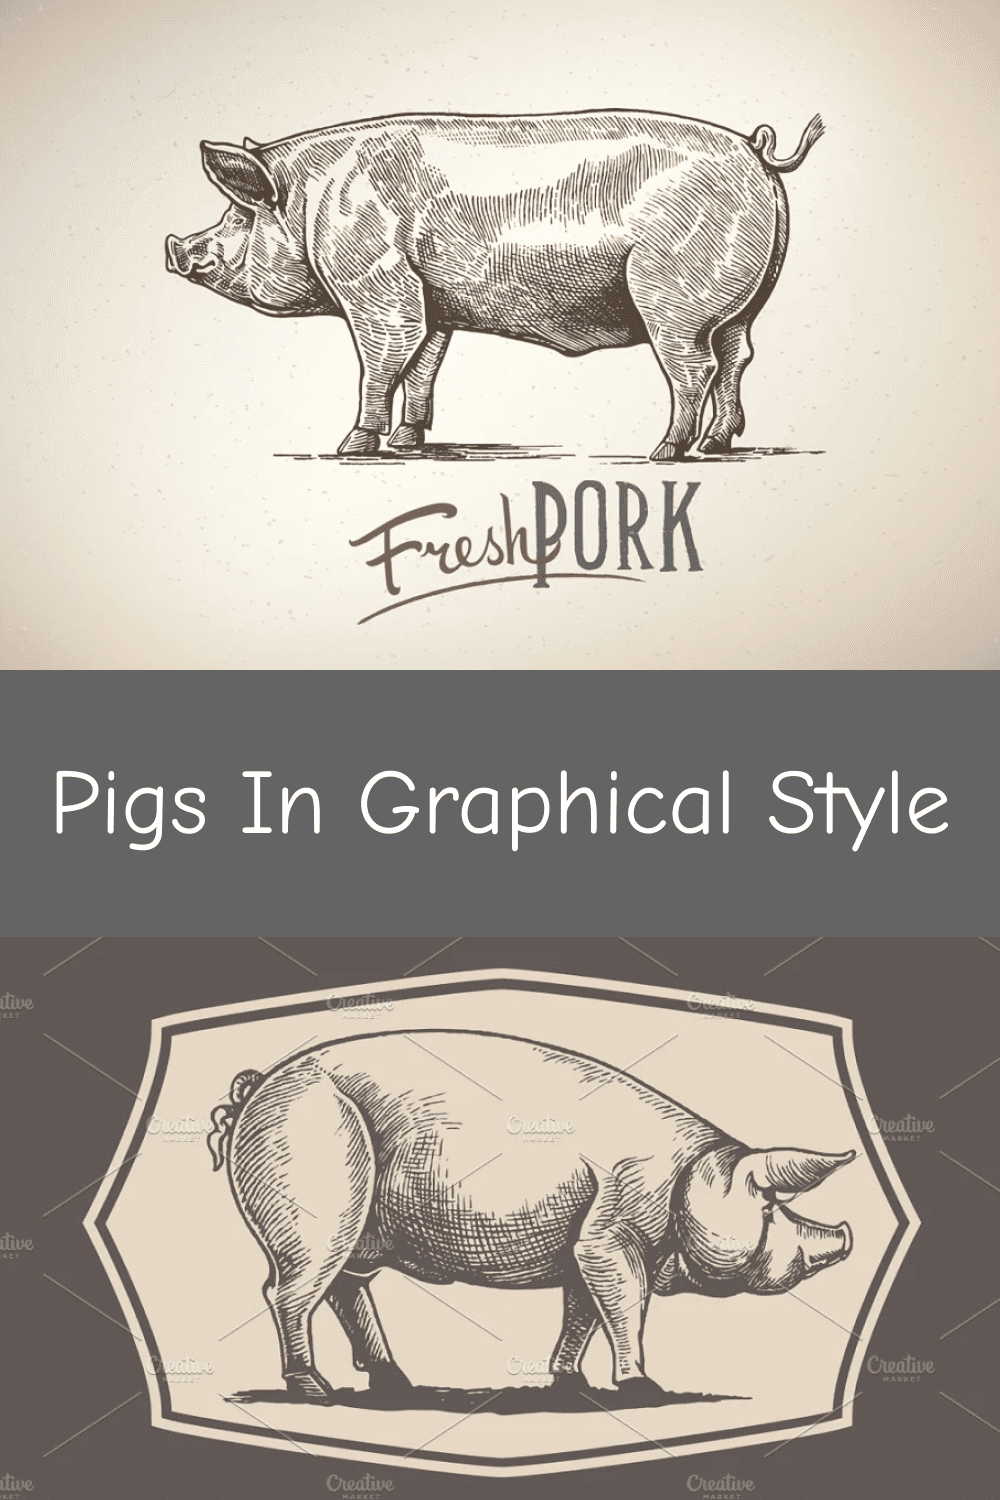 Pigs in Graphical Style.